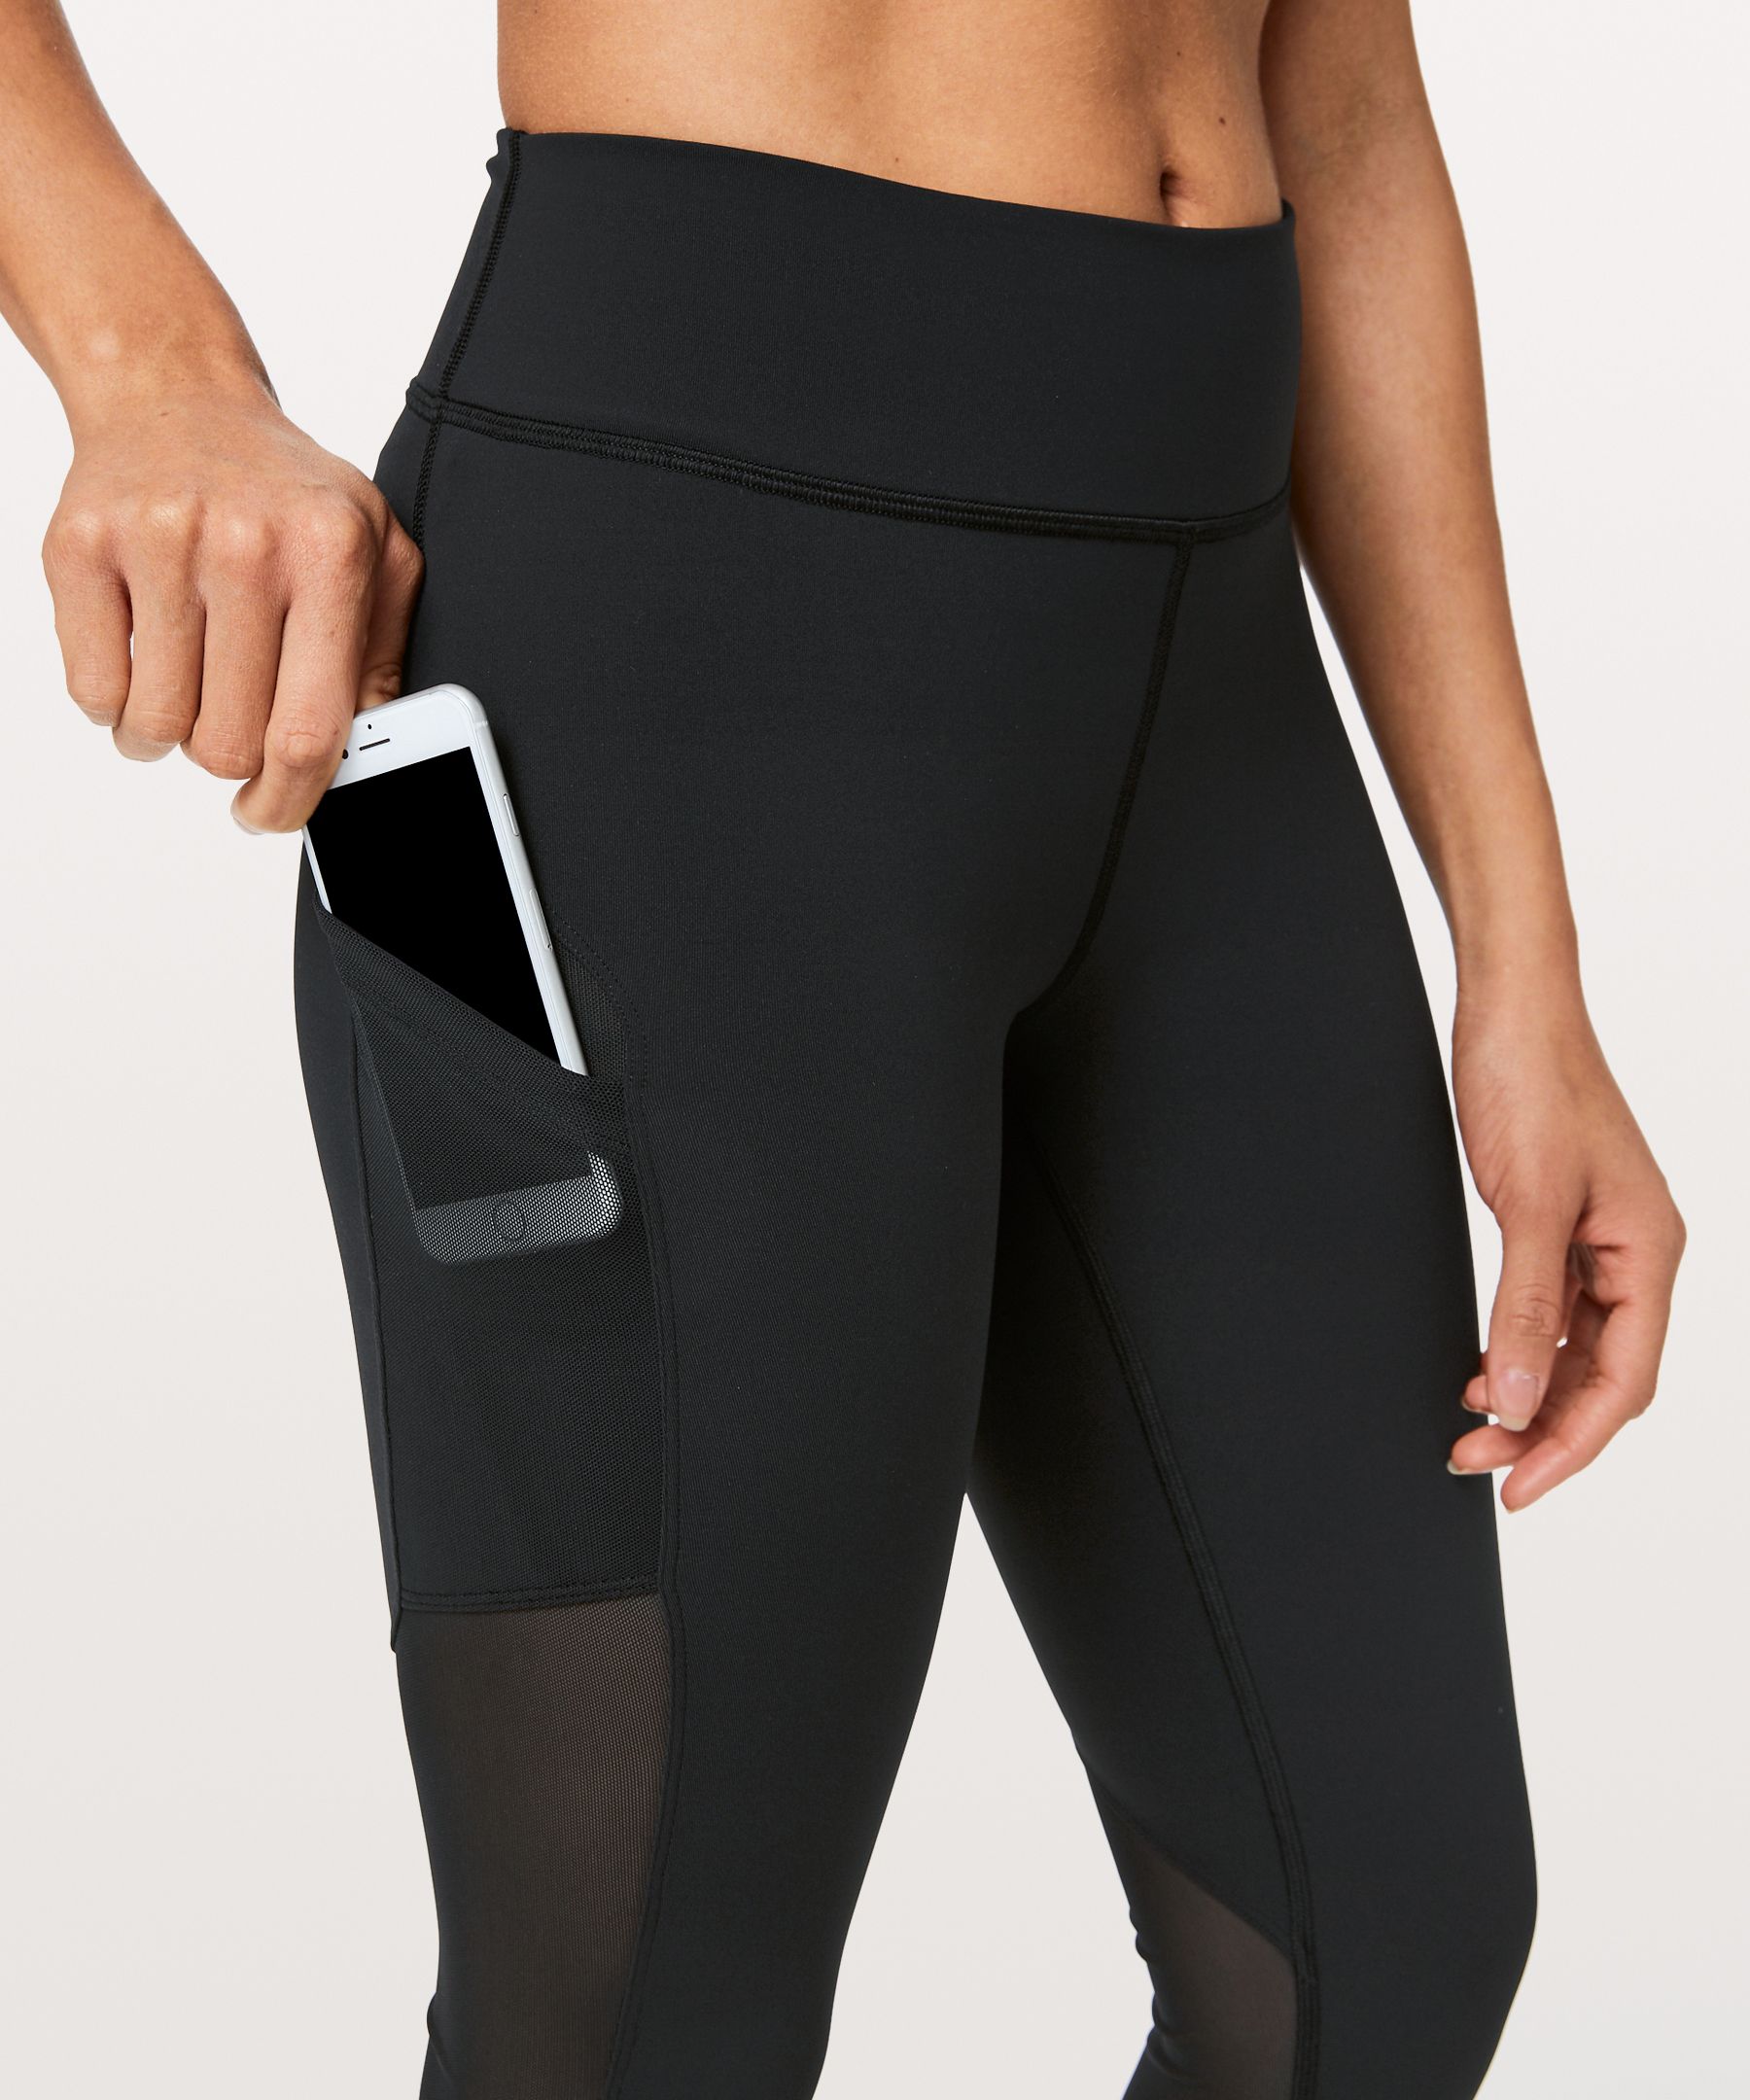 Fabletics Mila High-Waisted Pocket Legging, Functional Workout Gear to  Stash All Your Essentials